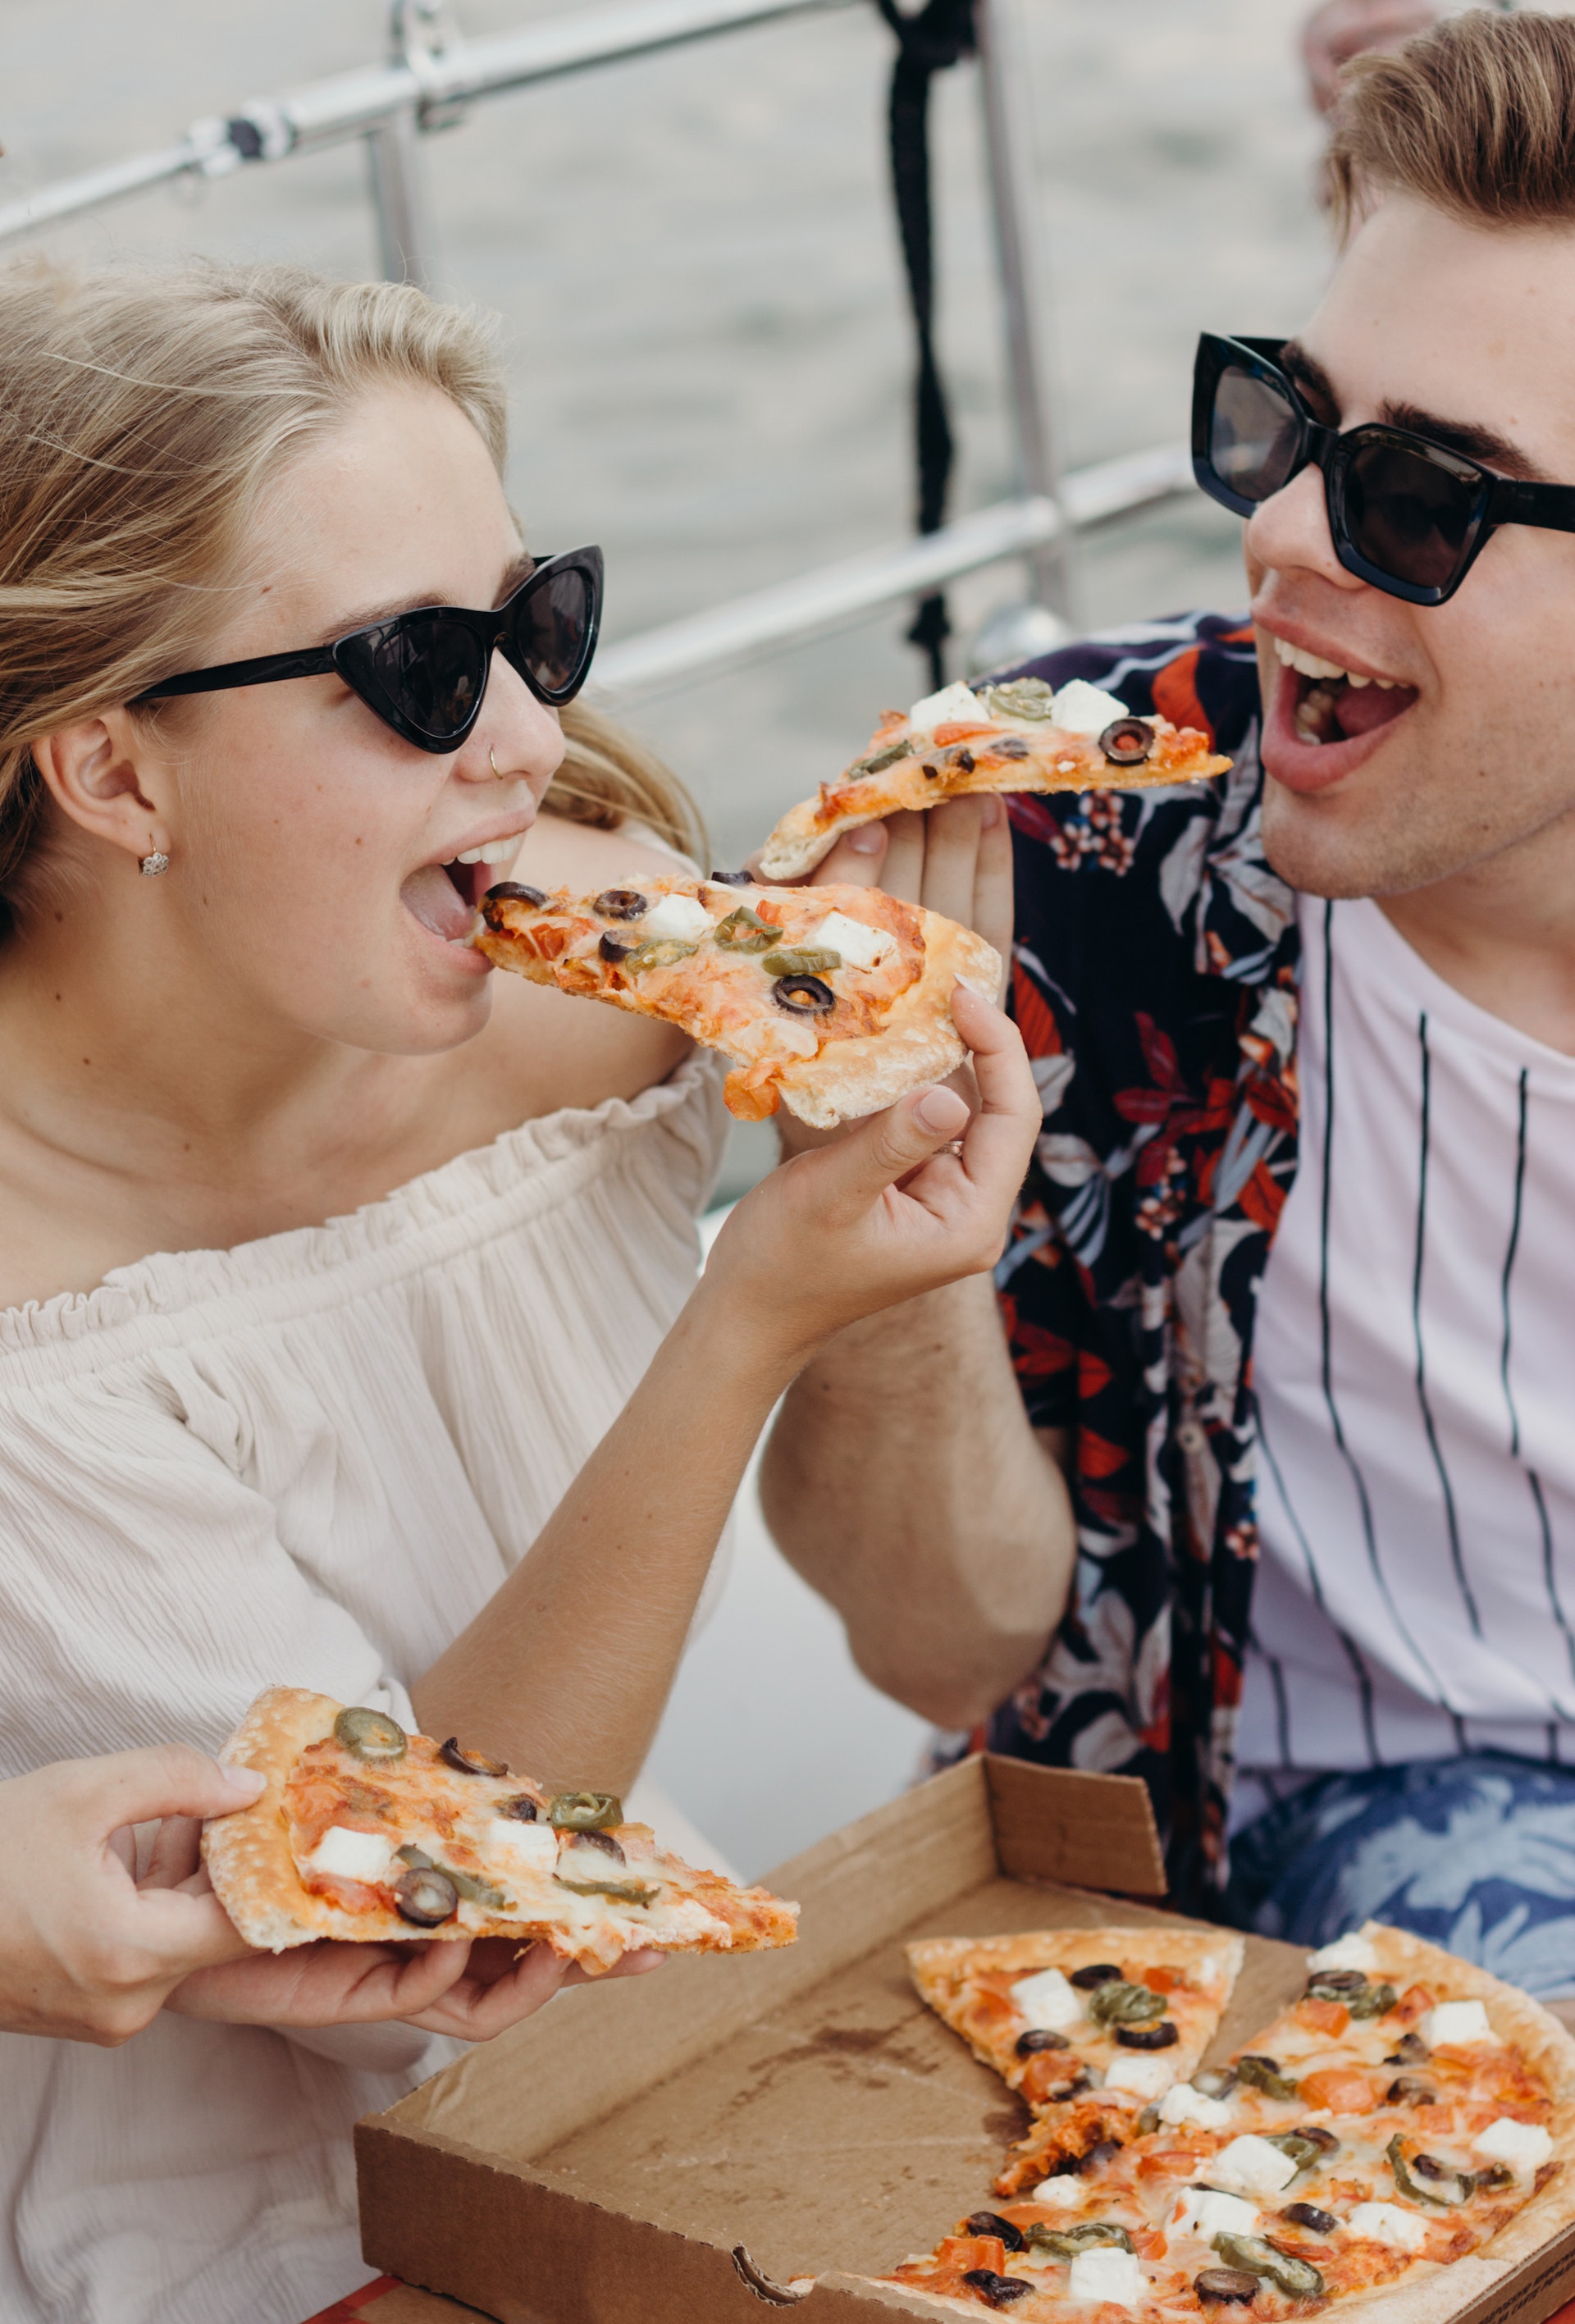 A couple eating pizza | Source: Pexels